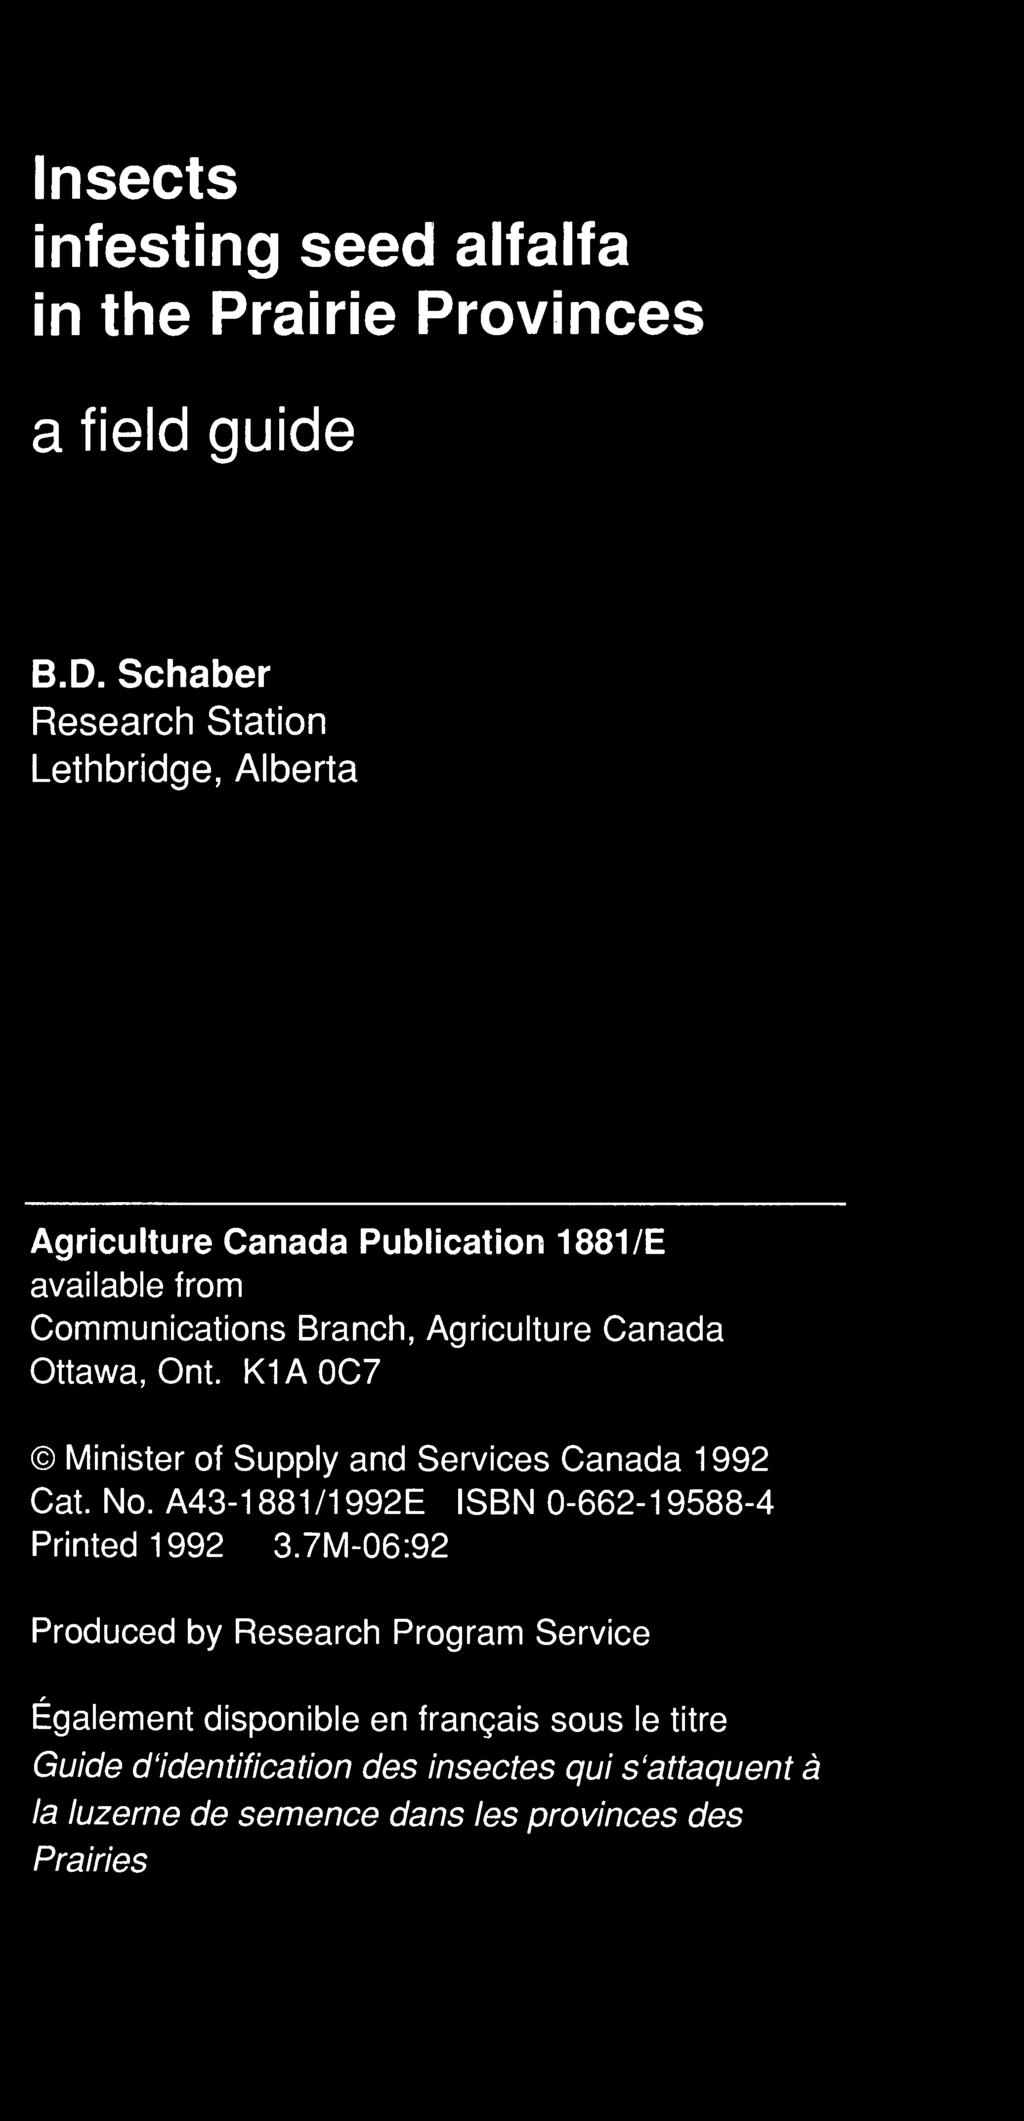 Canada Ottawa, Ont. K1A0C7 Minister of Supply and Services Canada 1992 Cat. No. A43-1881/1992E ISBN 0-662-19588-4 Printed 1992 3.